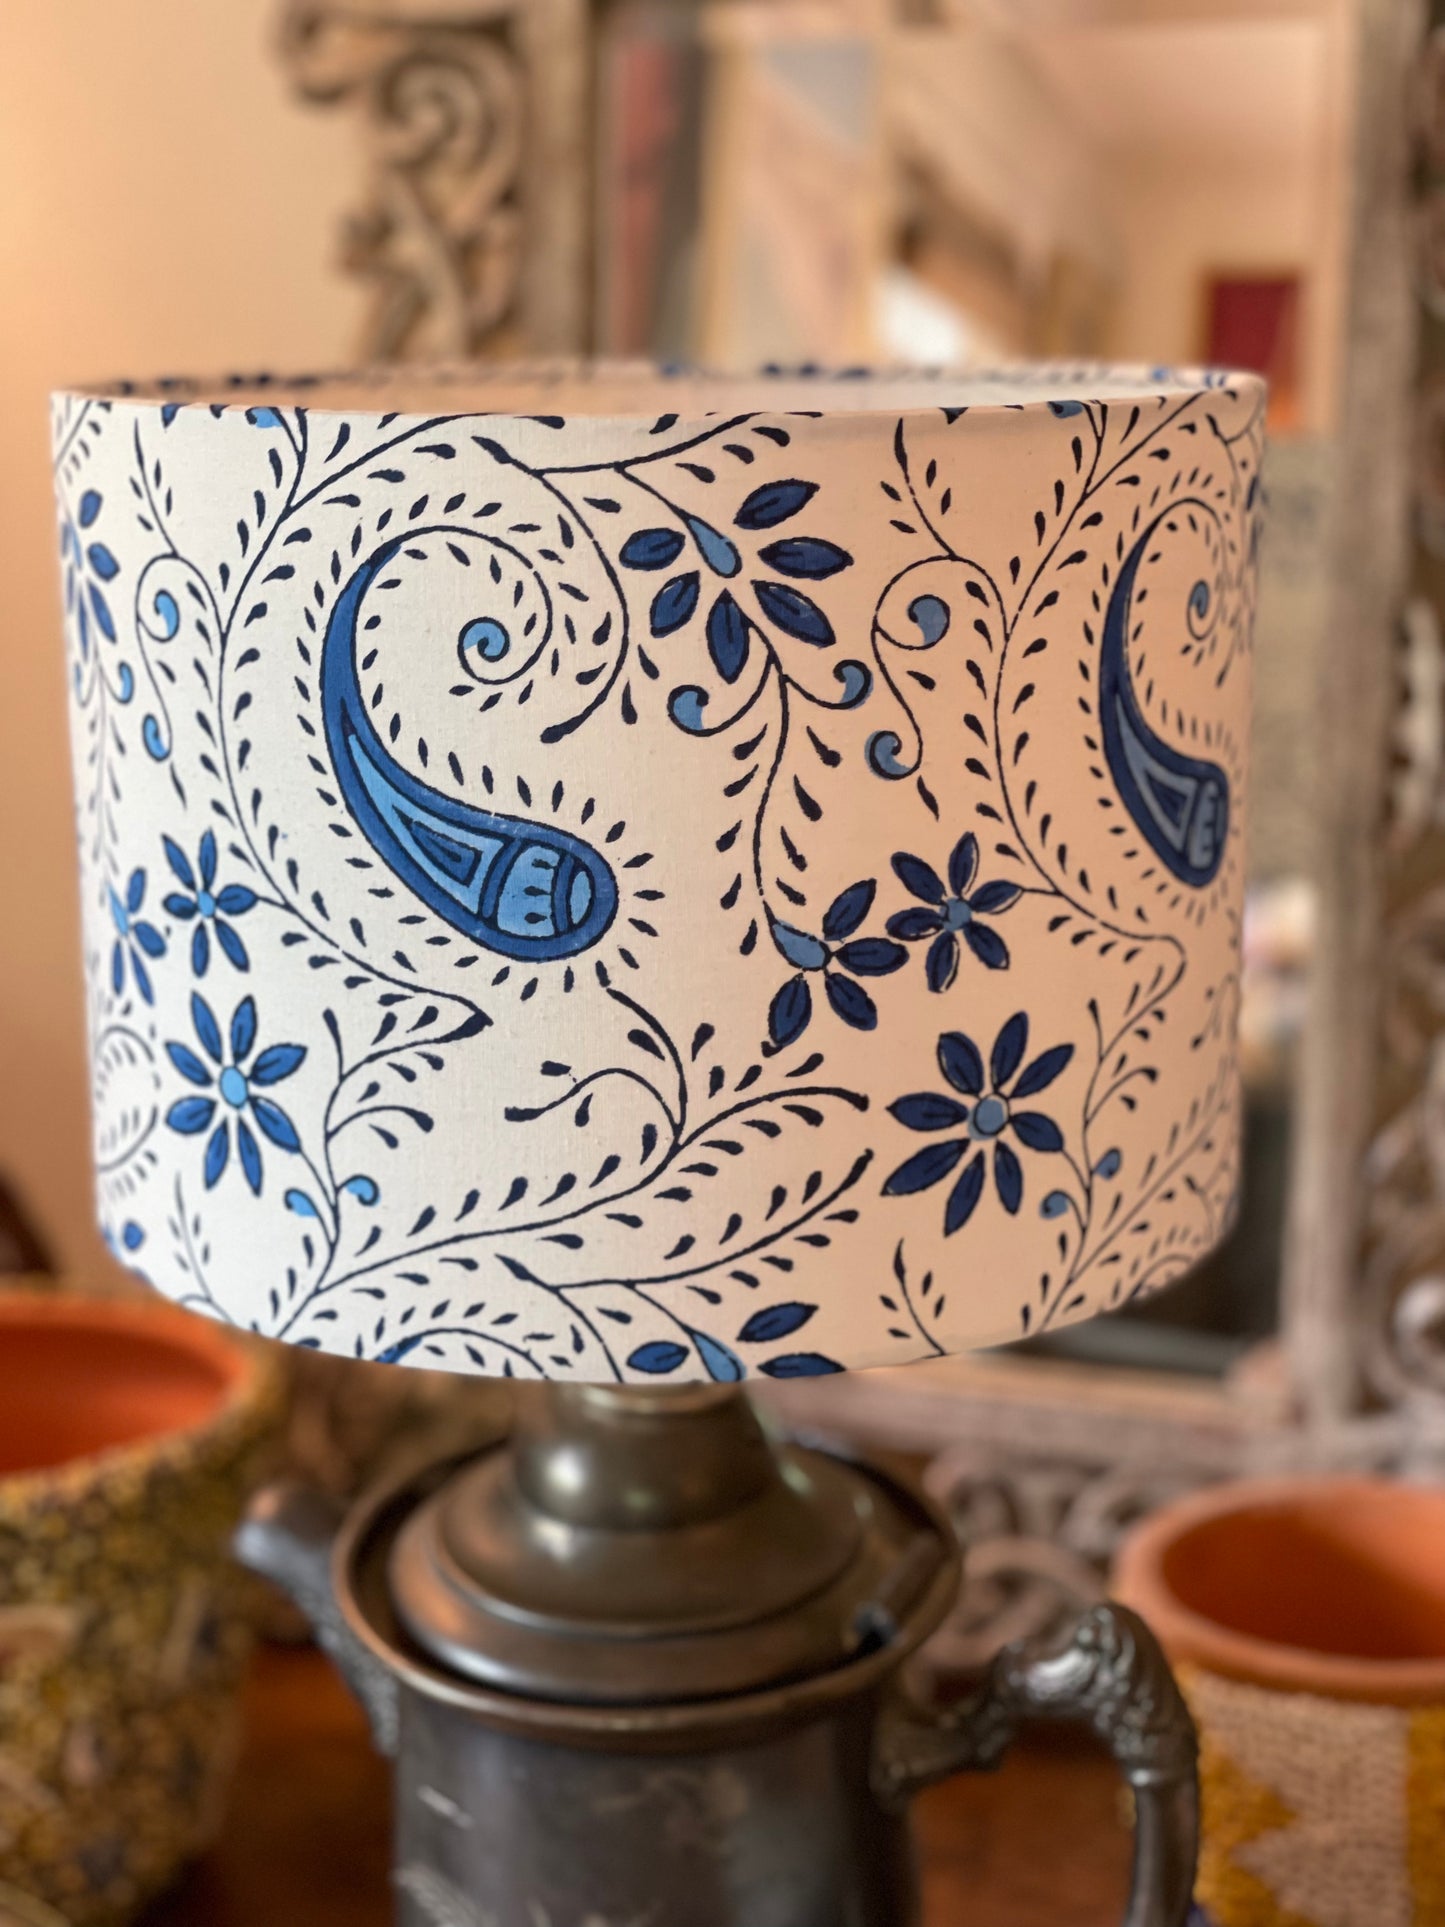 10 inch Drum Lampshade. Indian Block Print. Playful Floral and Paisley. Oxford Blue and Navy on White.